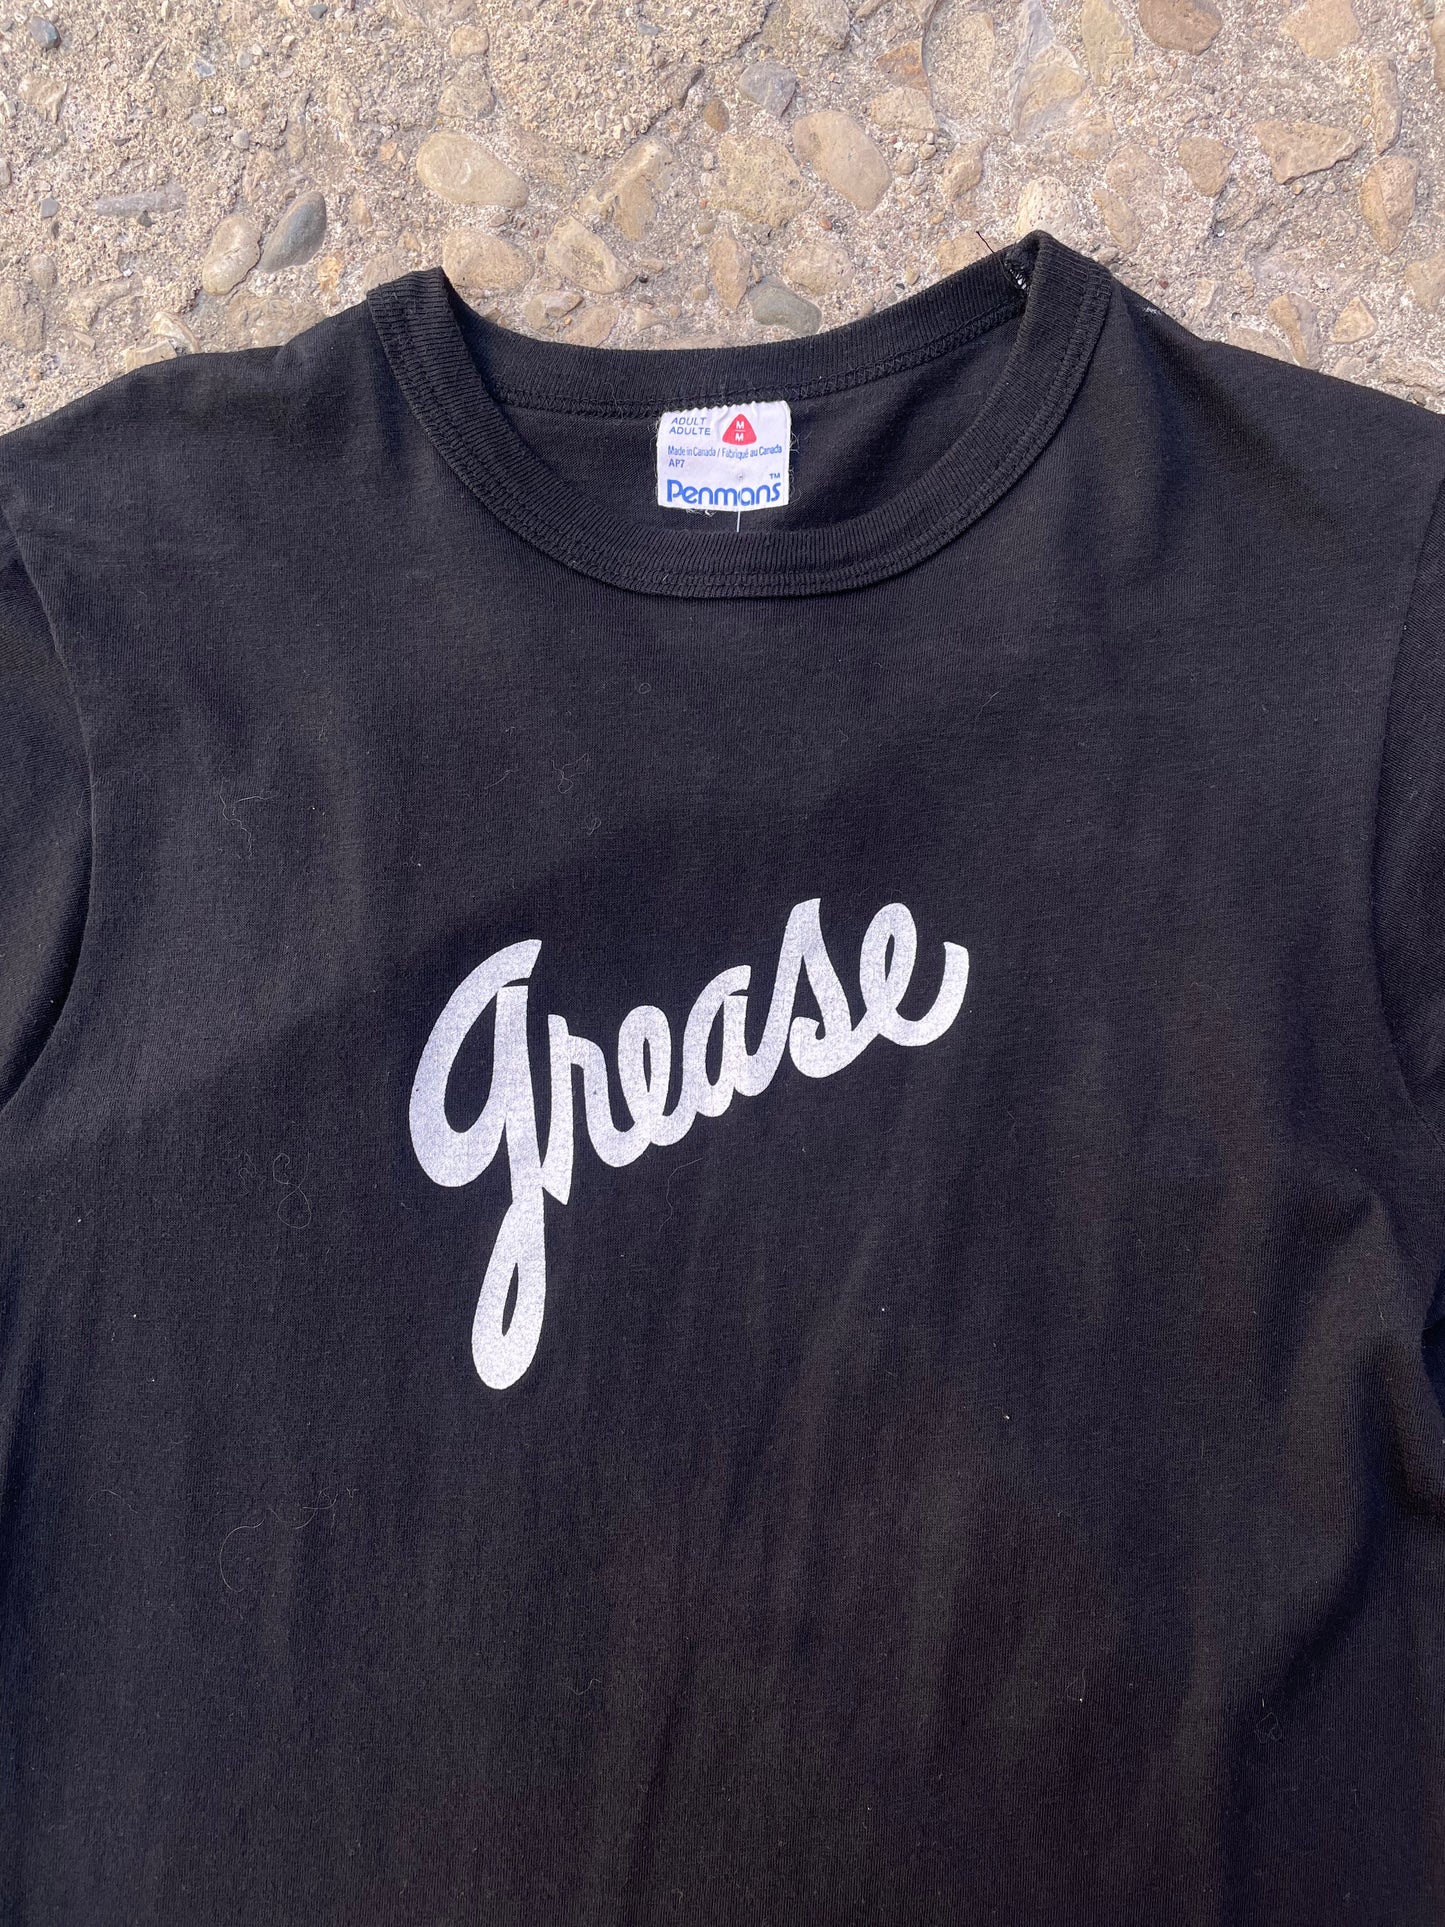 1980's Grease Movie Promo Graphic Ringer T-Shirt - S